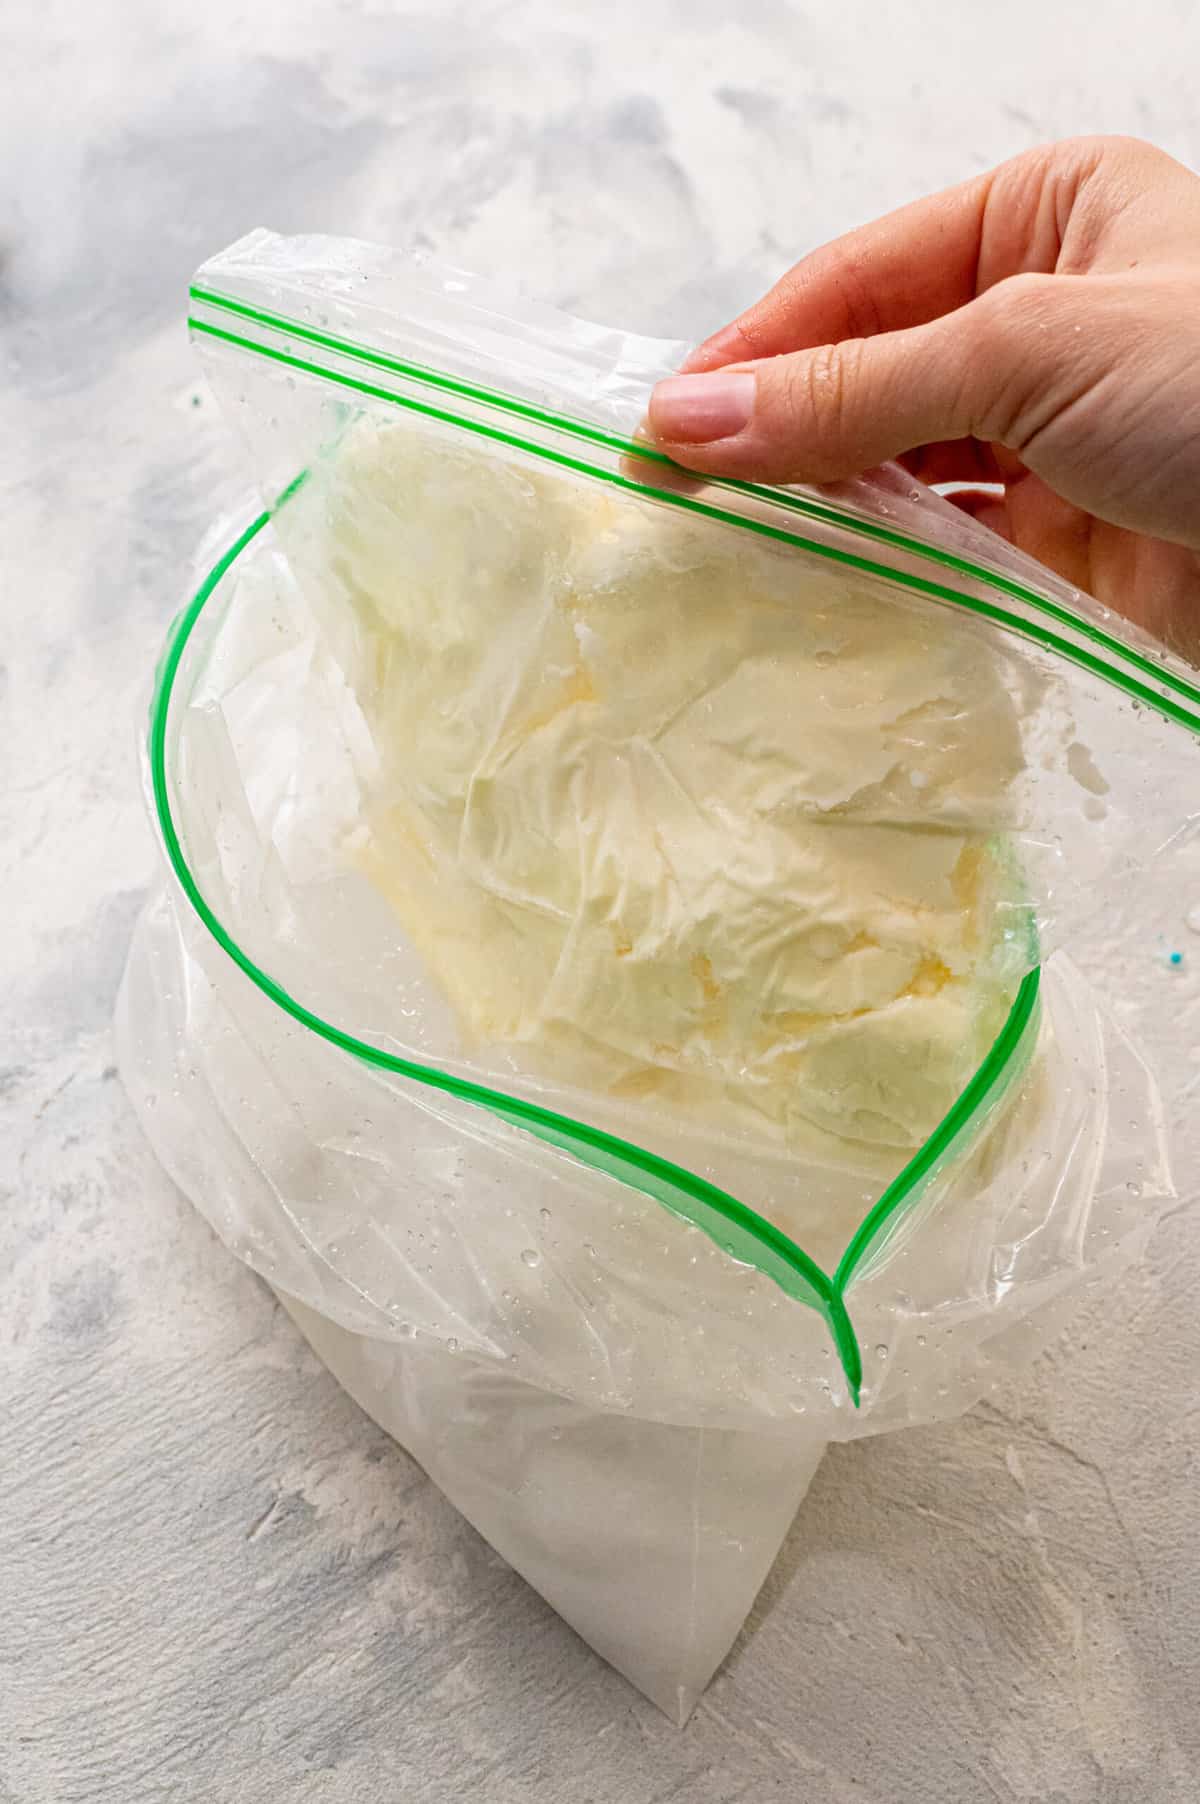 Take ice Cream out of the bag once it is made into ice cream